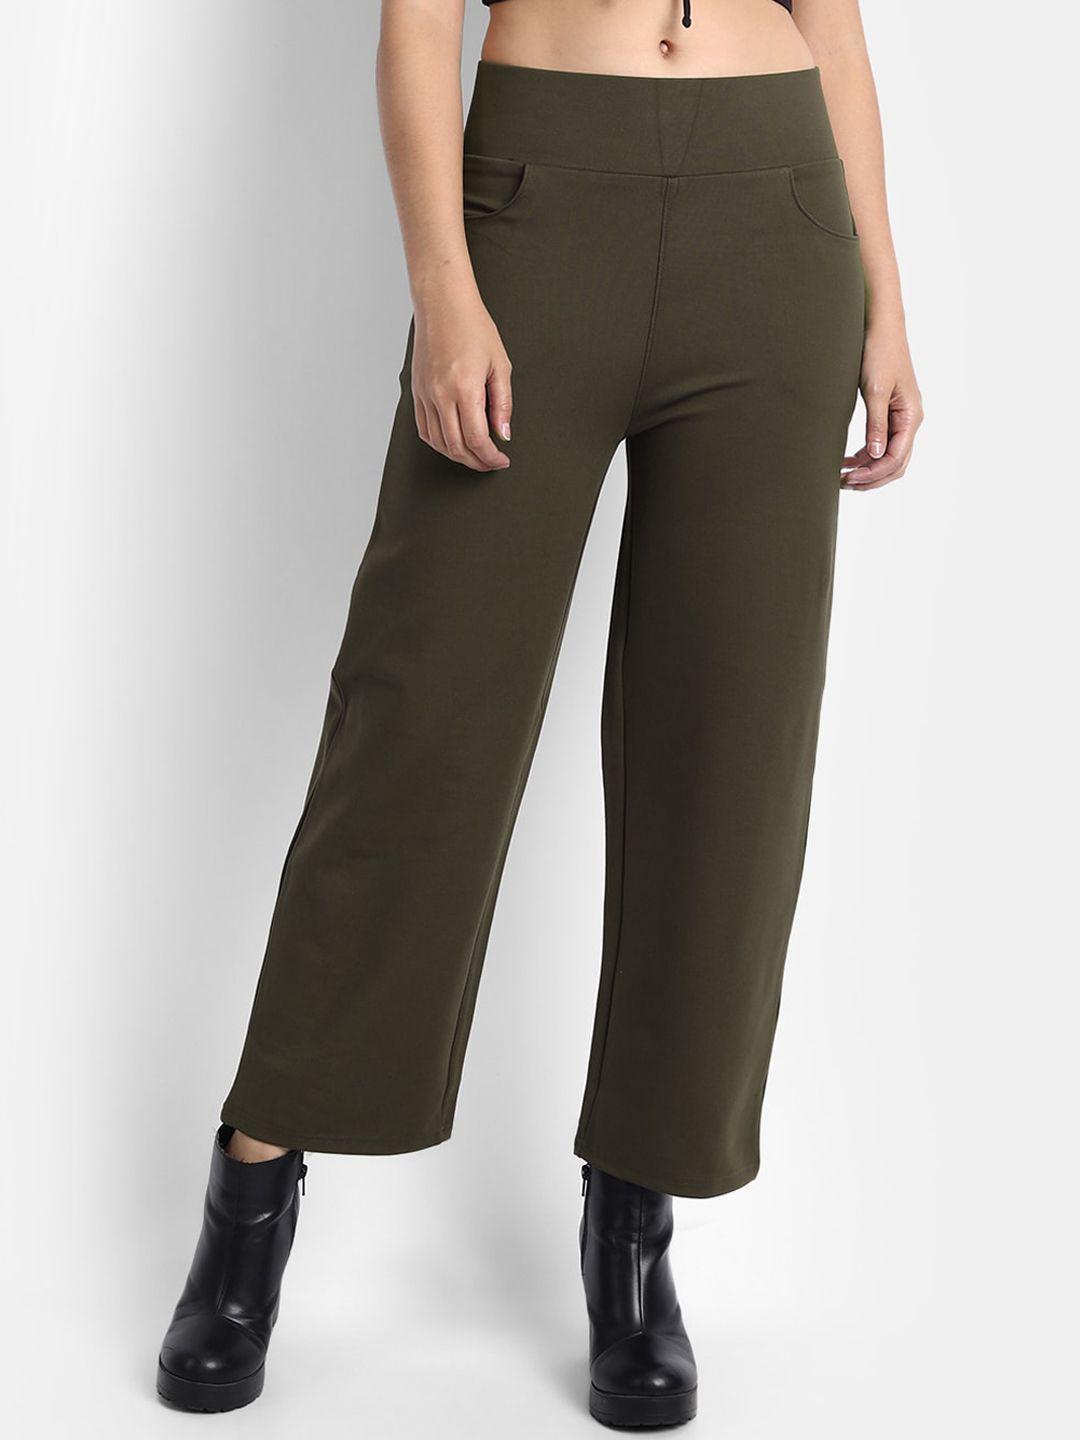 next-one-women-relaxed-straight-leg-straight-fit-high-rise-easy-wash-trousers